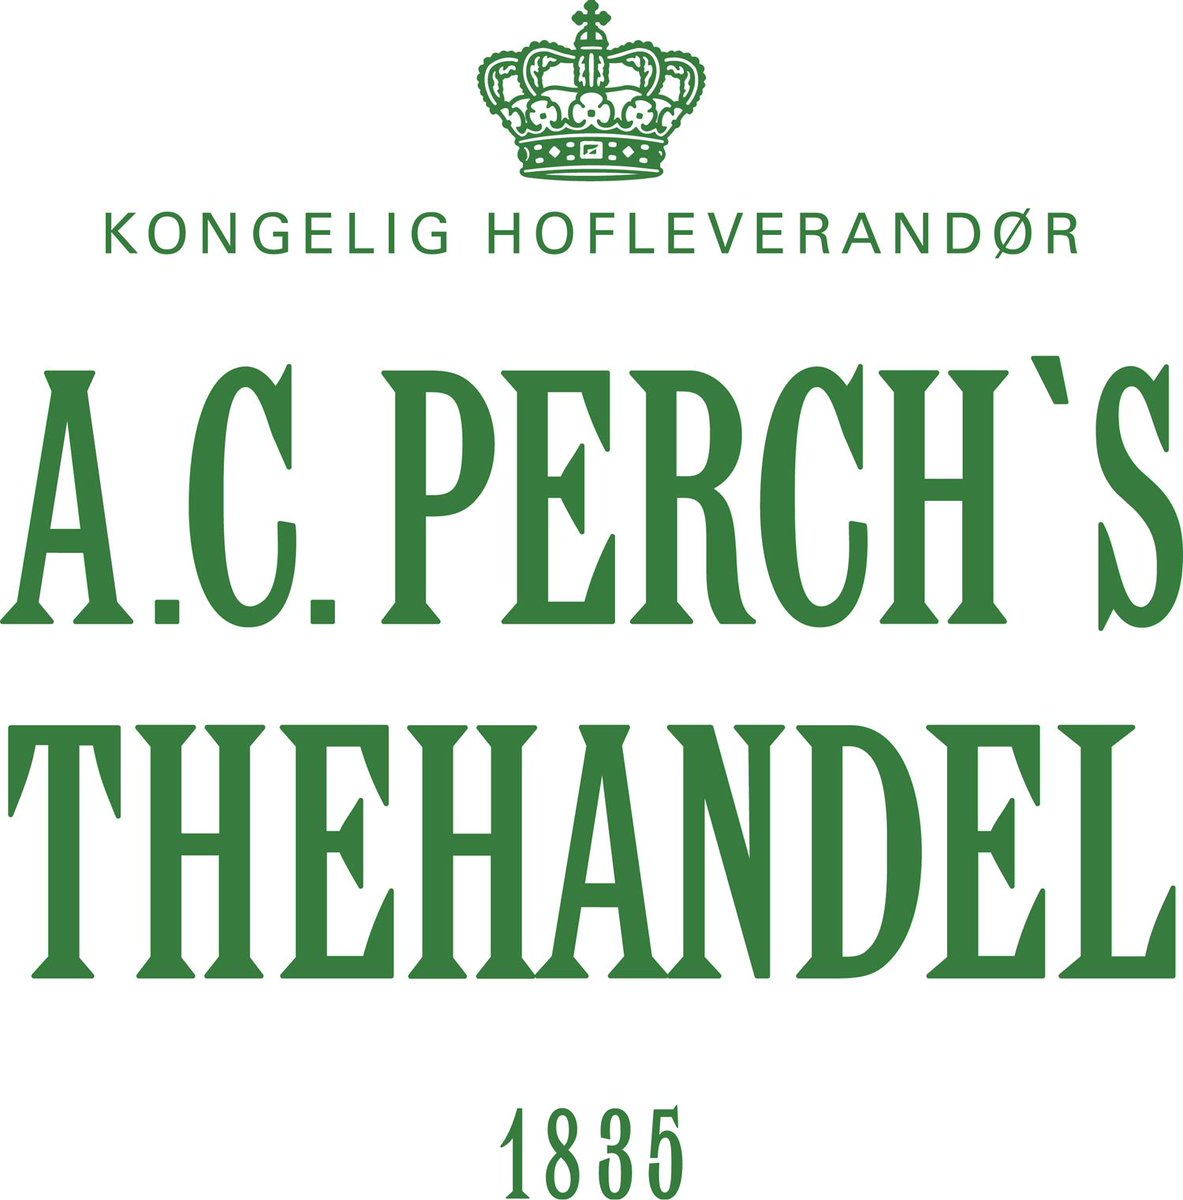 Ethical Tea on Twitter: "Really pleased to welcome A.C.Perchs Thehandel to - our first member from http://t.co/FKlRlGiCke http://t.co/PSPtjDO4jx" / Twitter